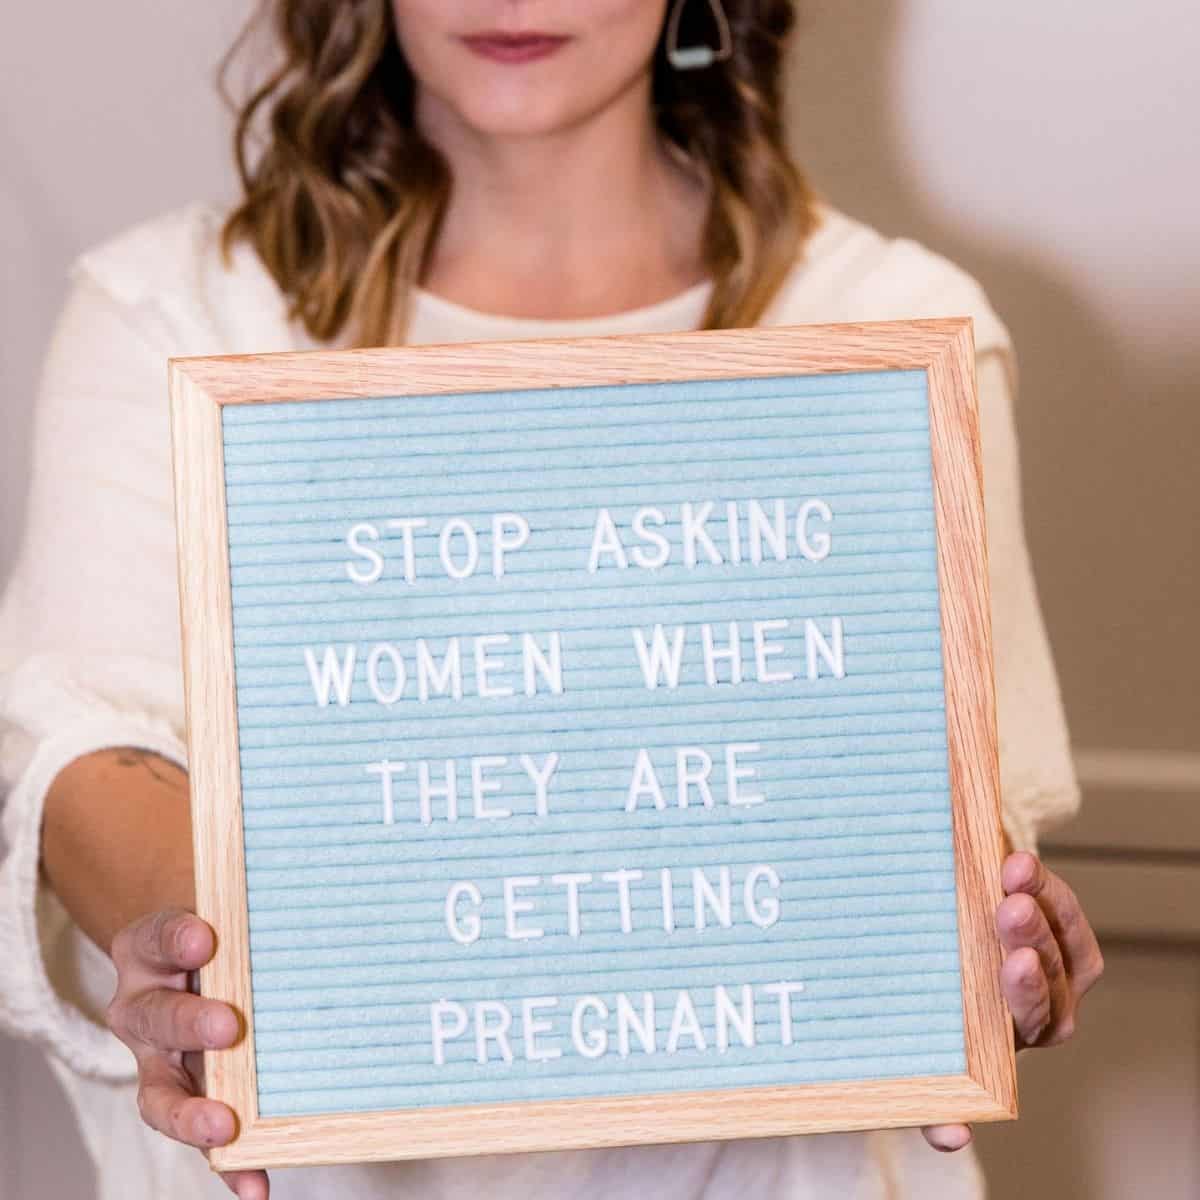 woman holding up letterboard that reads "stop asking women when they are getting pregnant"